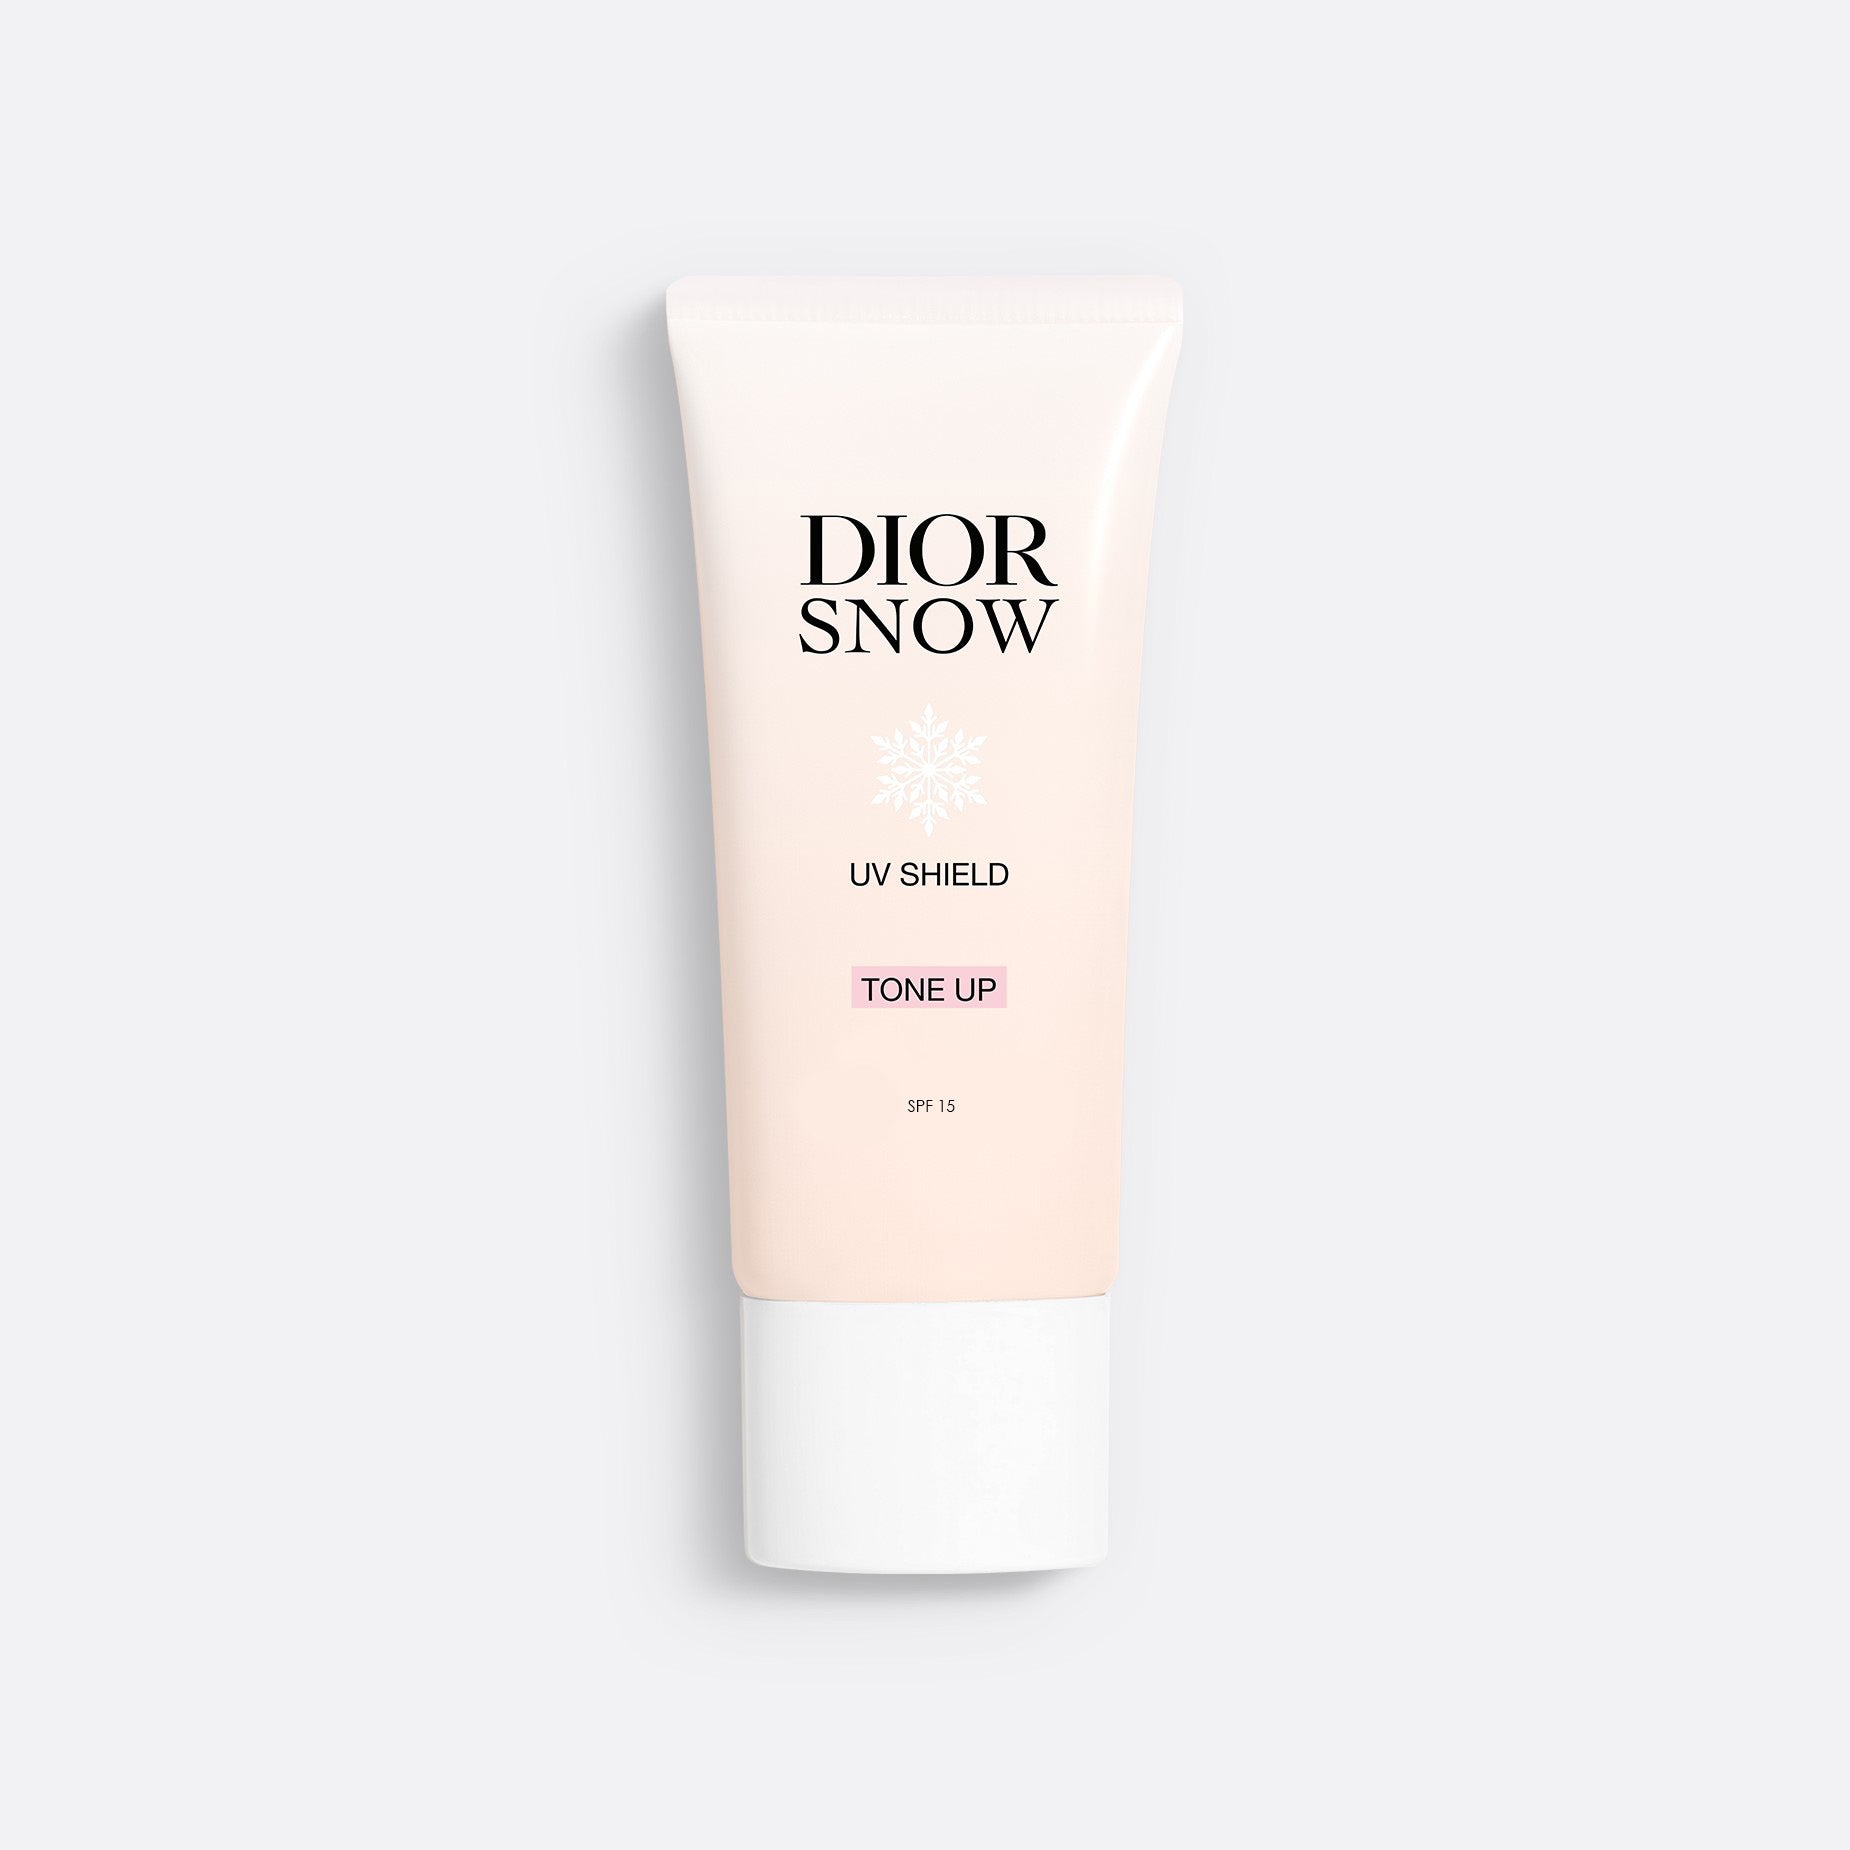 DIORSNOW UV SHIELD TONE UP | UV Protection for Face - Tinted Skincare